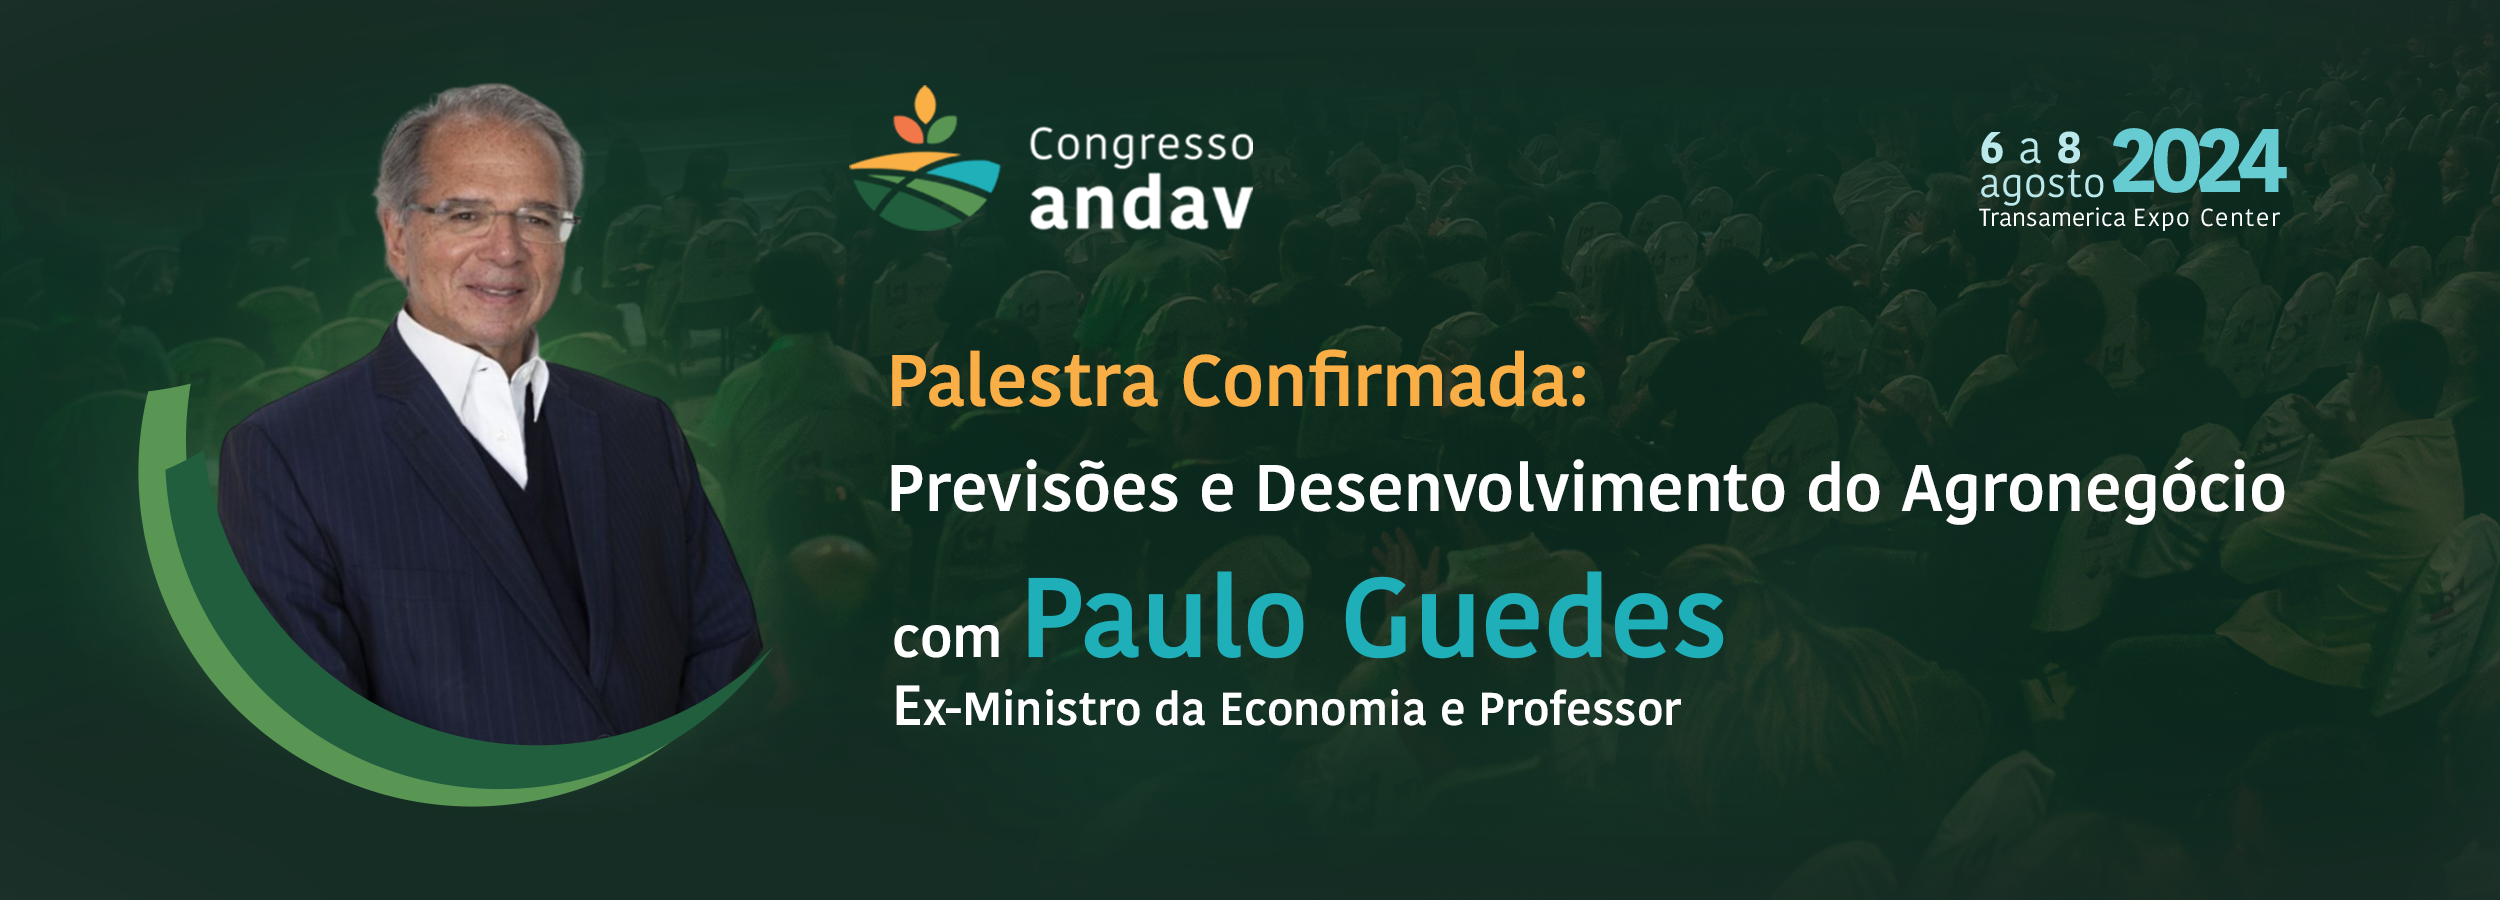 Paulo Guedes Andav